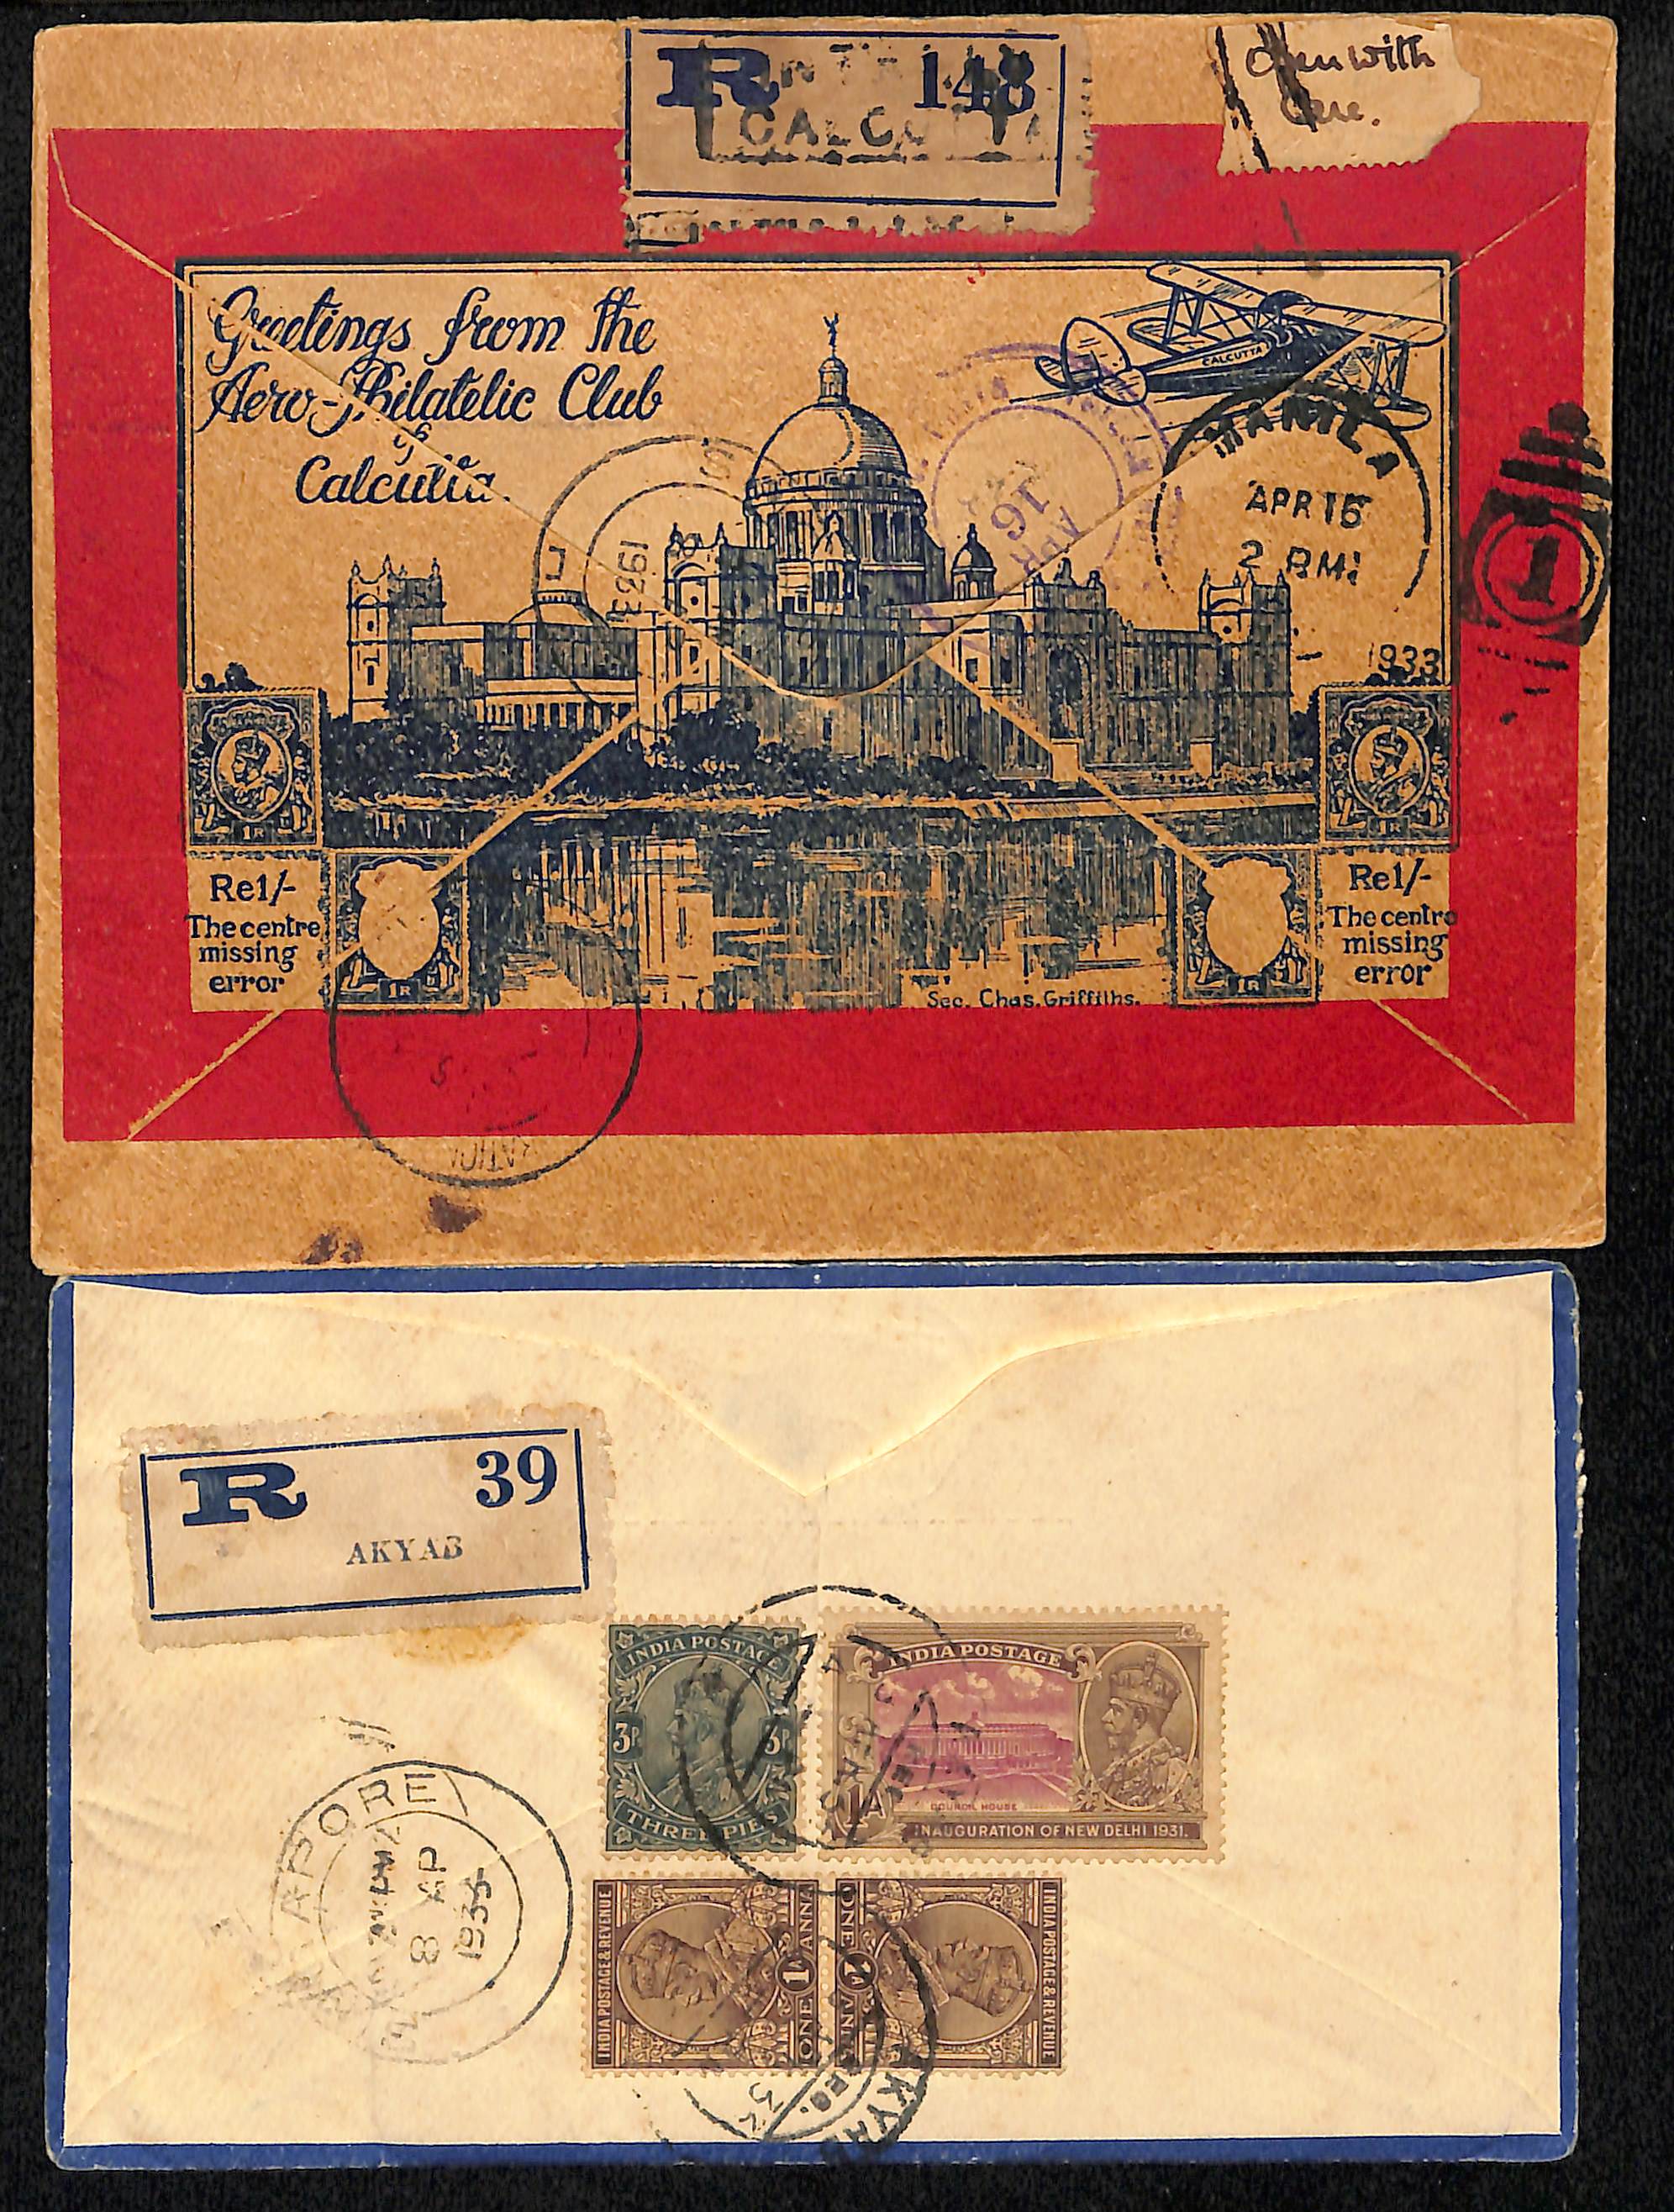 1933 (Apr 5) First KLM flight to Japan and the Philippines via Singapore, covers from Calcutta to - Image 2 of 2